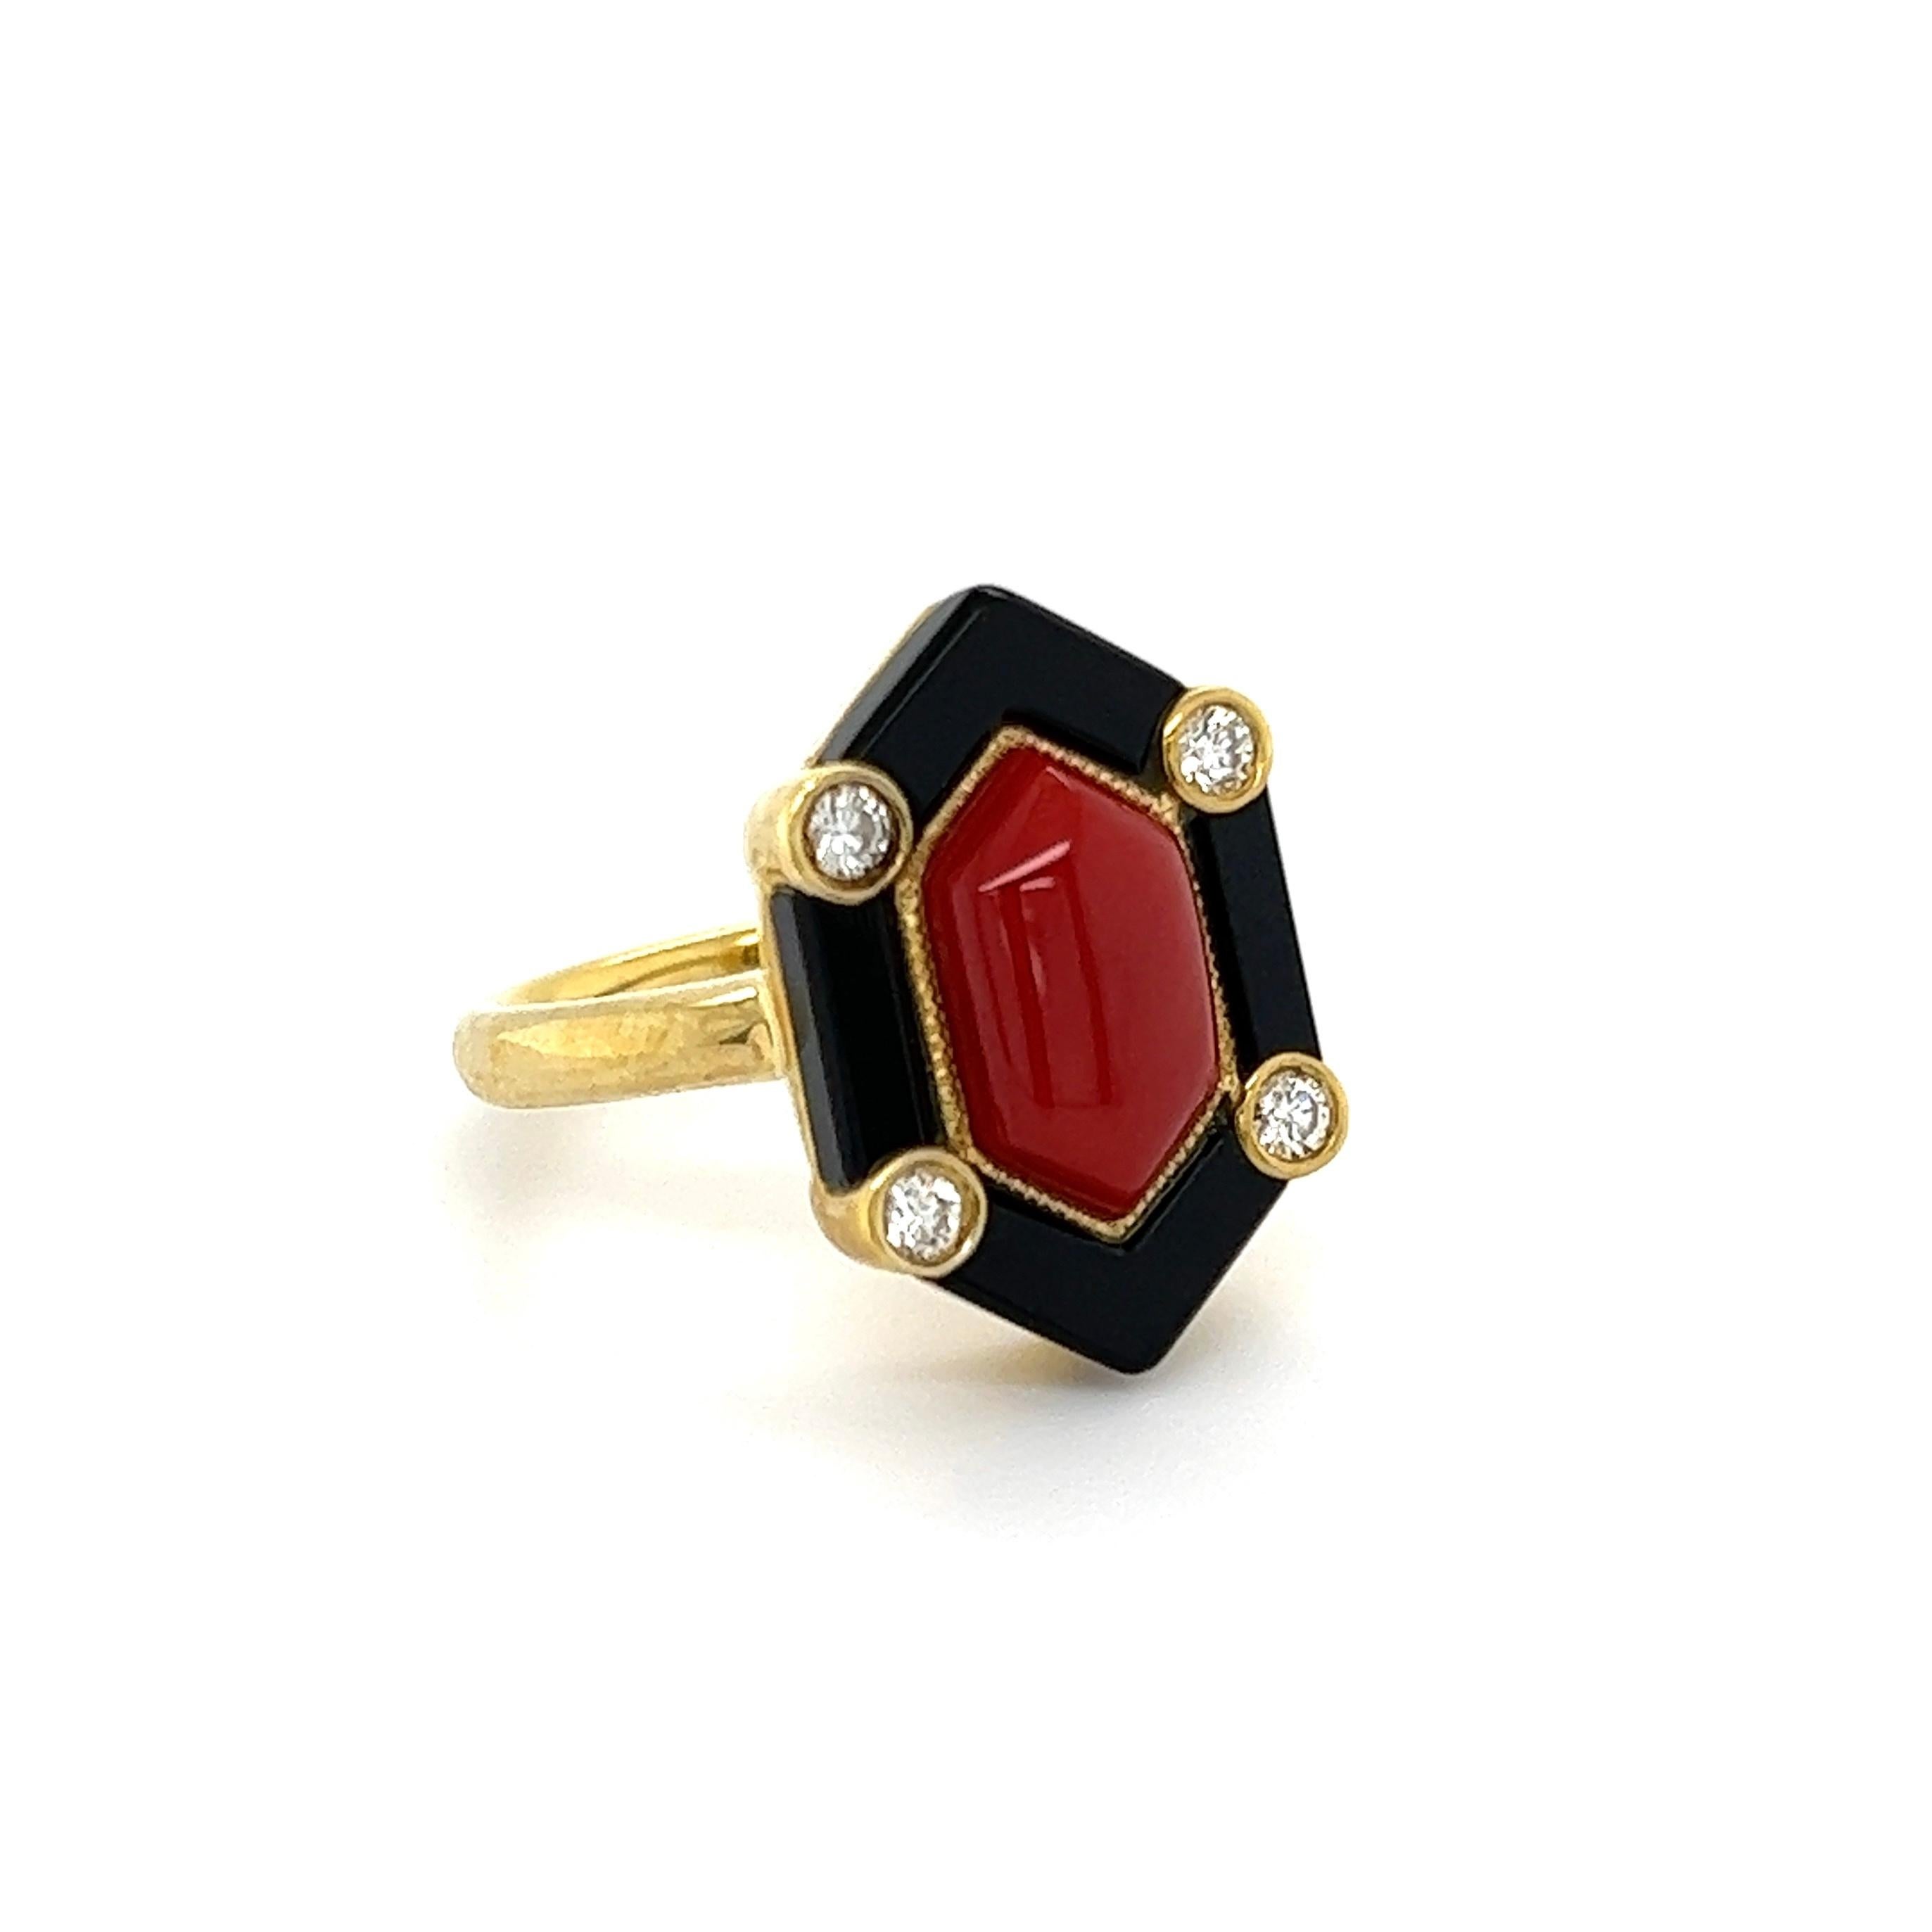 Simply Beautiful! Hexagon Cabochon Coral and Black Onyx Ring, accented by 4 Diamonds, approx. 0.16 total carat weight. Hand crafted 18K Yellow Gold mounting. Dimensions 96” l x 0.78” w x 0.75” h.  Ring size 6, we offer ring resizing. The perfect